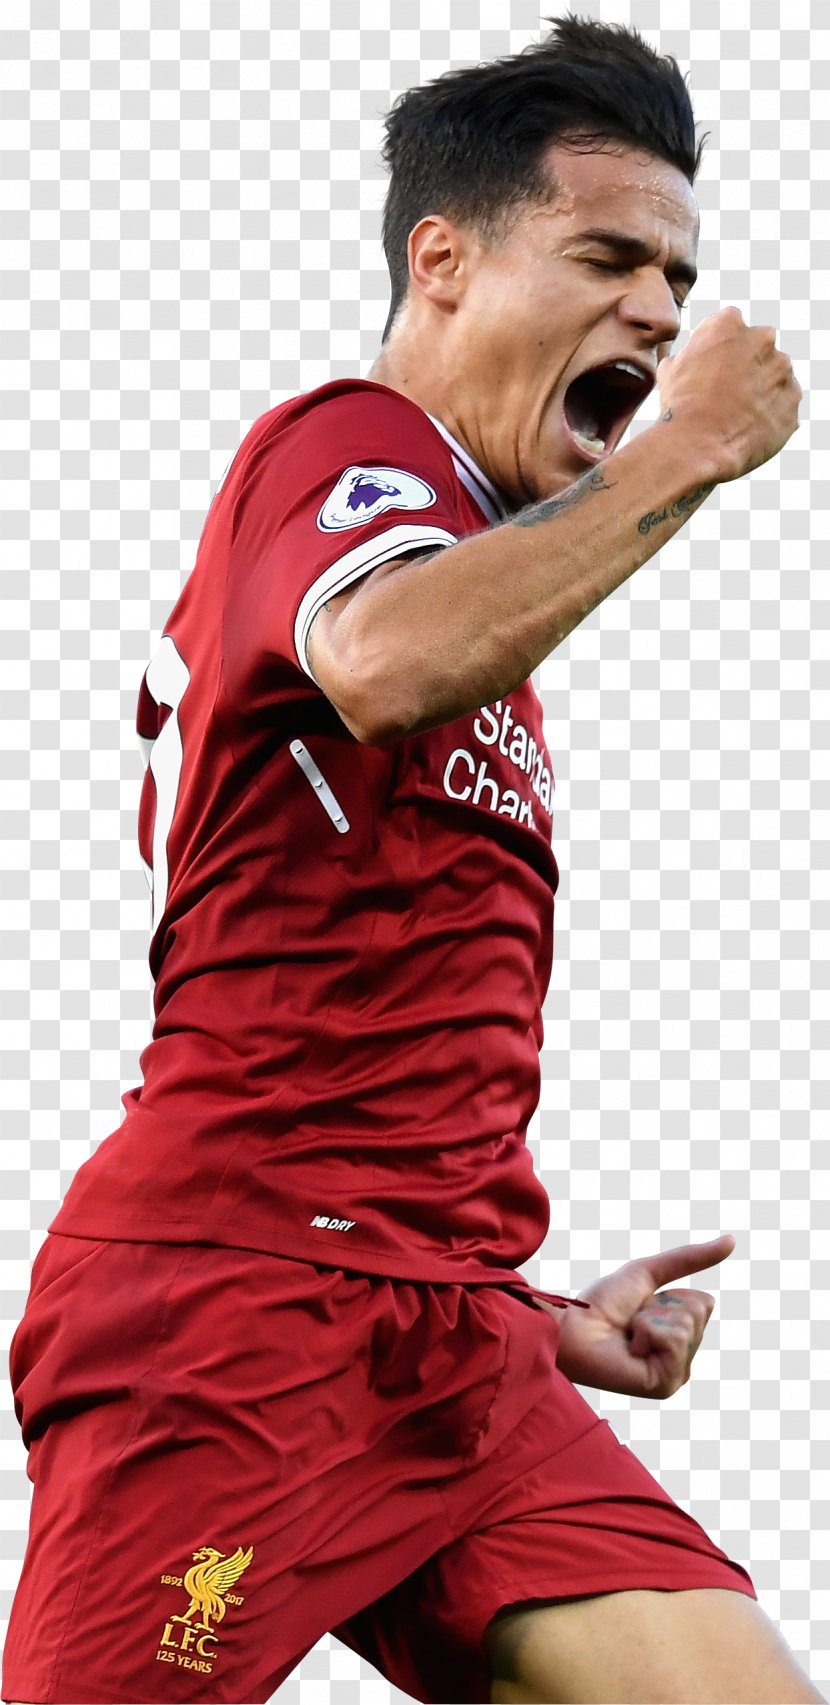 Philippe Coutinho Jersey Football Player ユニフォーム - Shoe Transparent PNG